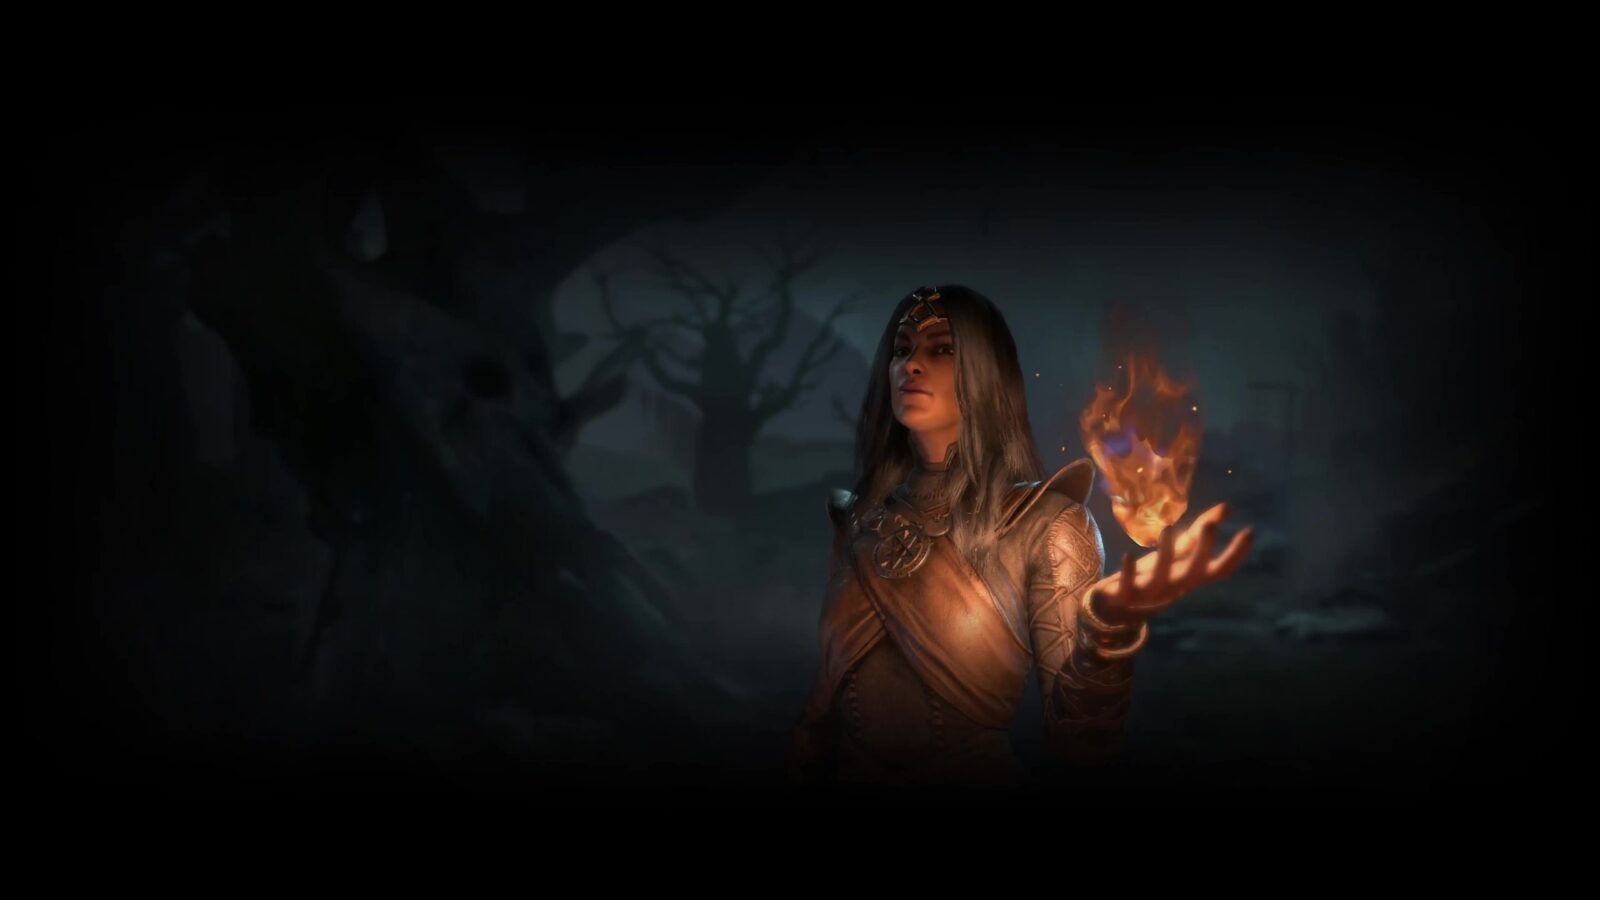 LiveWallpapers4Free.com | Diablo IV Sorcerer And Mysterious Mage 4K - Free Live Wallpaper